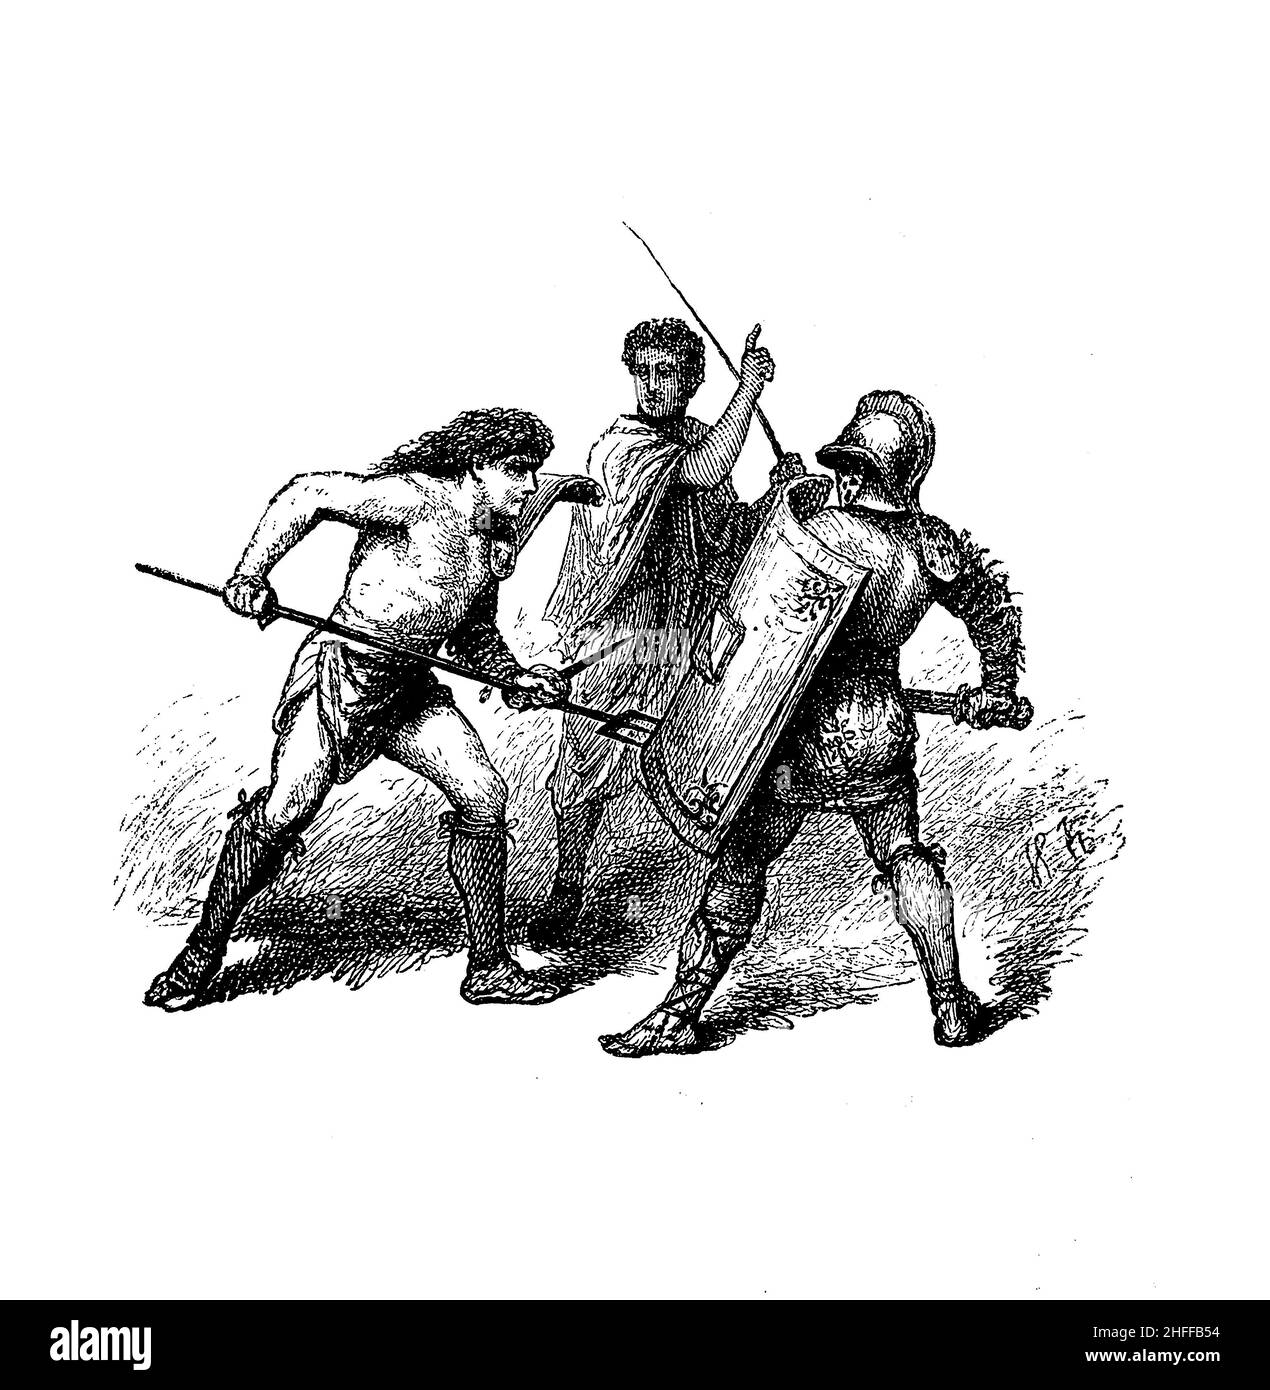 Gladiator fight, reconstruction from an ancien Roman mosaic Stock Photo